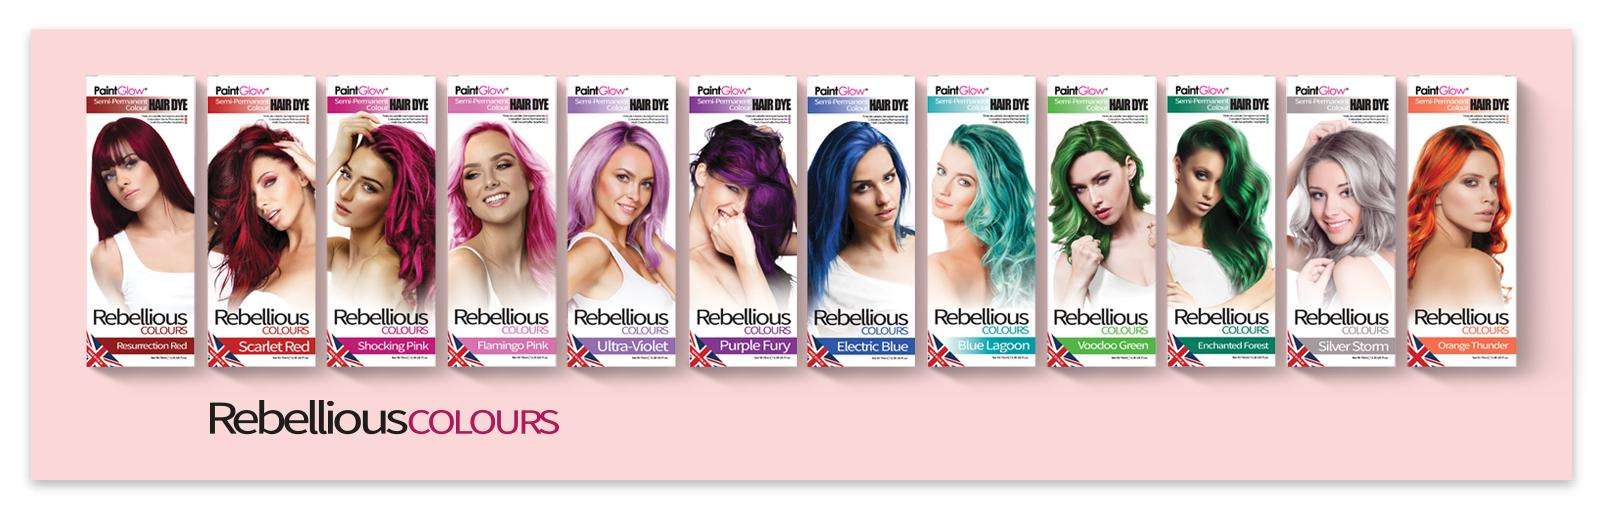 image of Rebellious hair colour packaging